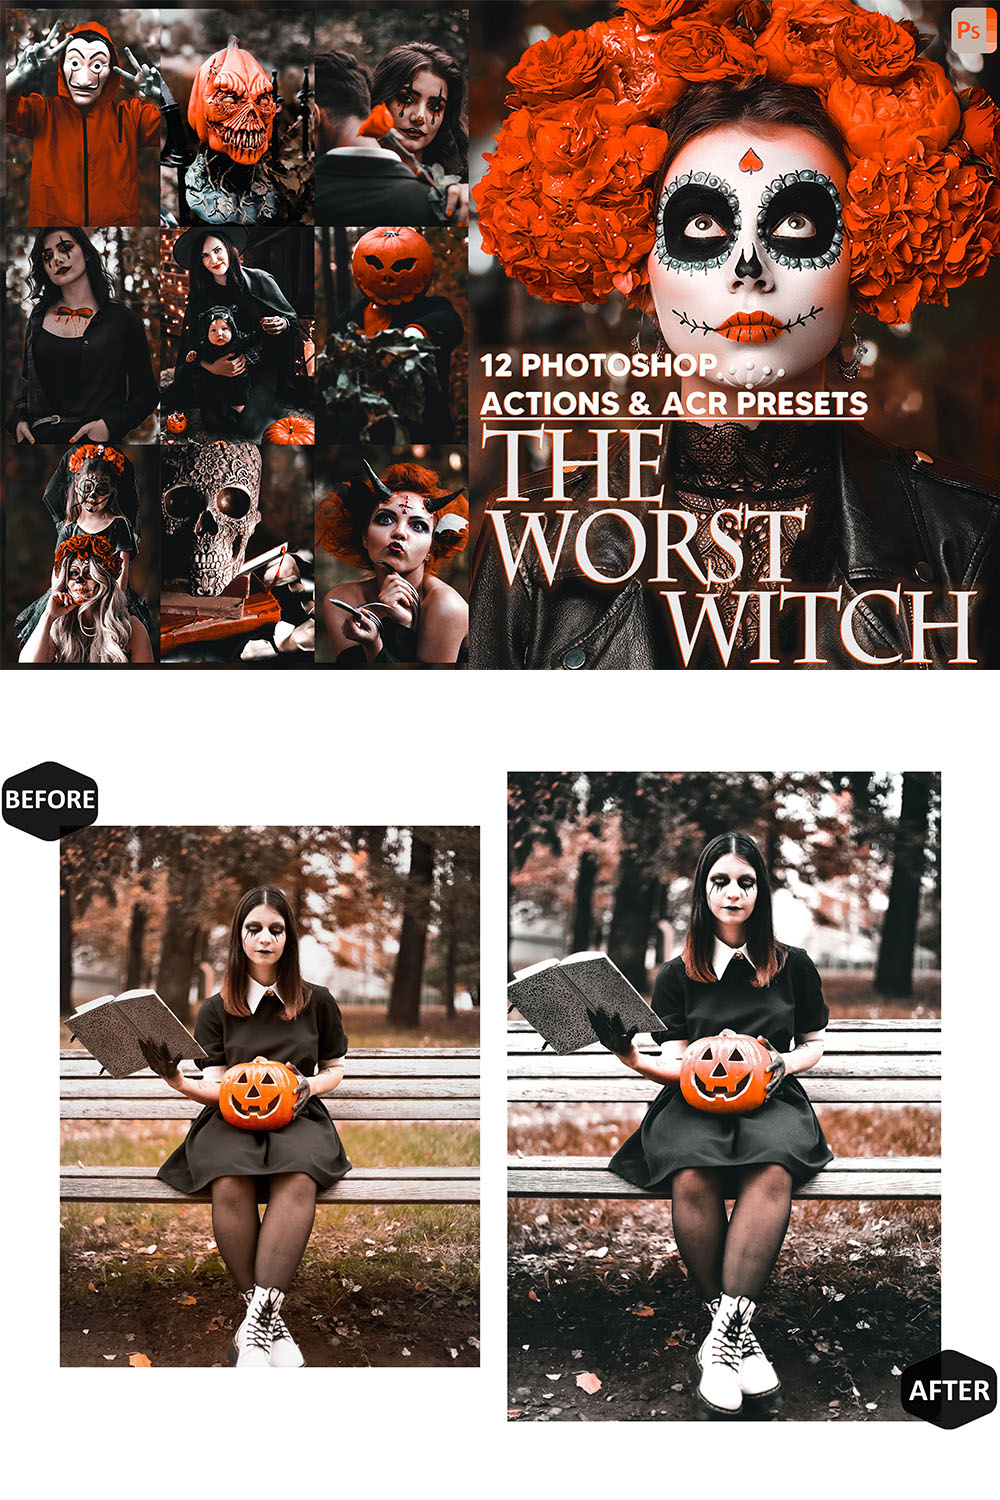 12 Photoshop Actions, The Worst Witch Ps Action, Halloween ACR Preset, Spooky Ps Filter, Atn Portrait And Lifestyle Theme Instagram, Blogger pinterest preview image.